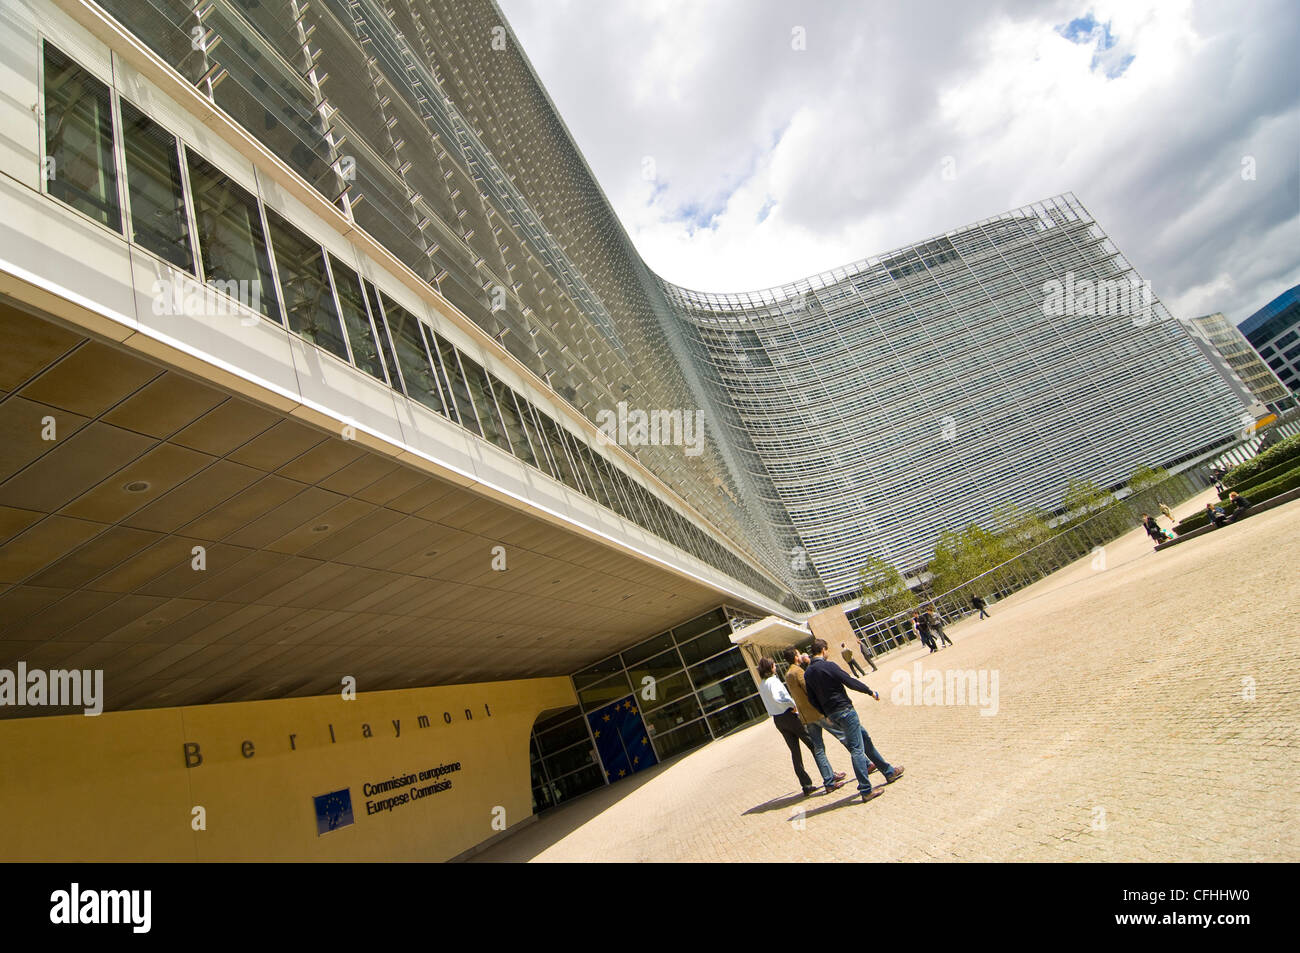 Horizontal wide angle of the Berlaymont building entrance, HQ for the European Commission in central Brussels, Belgium Stock Photo